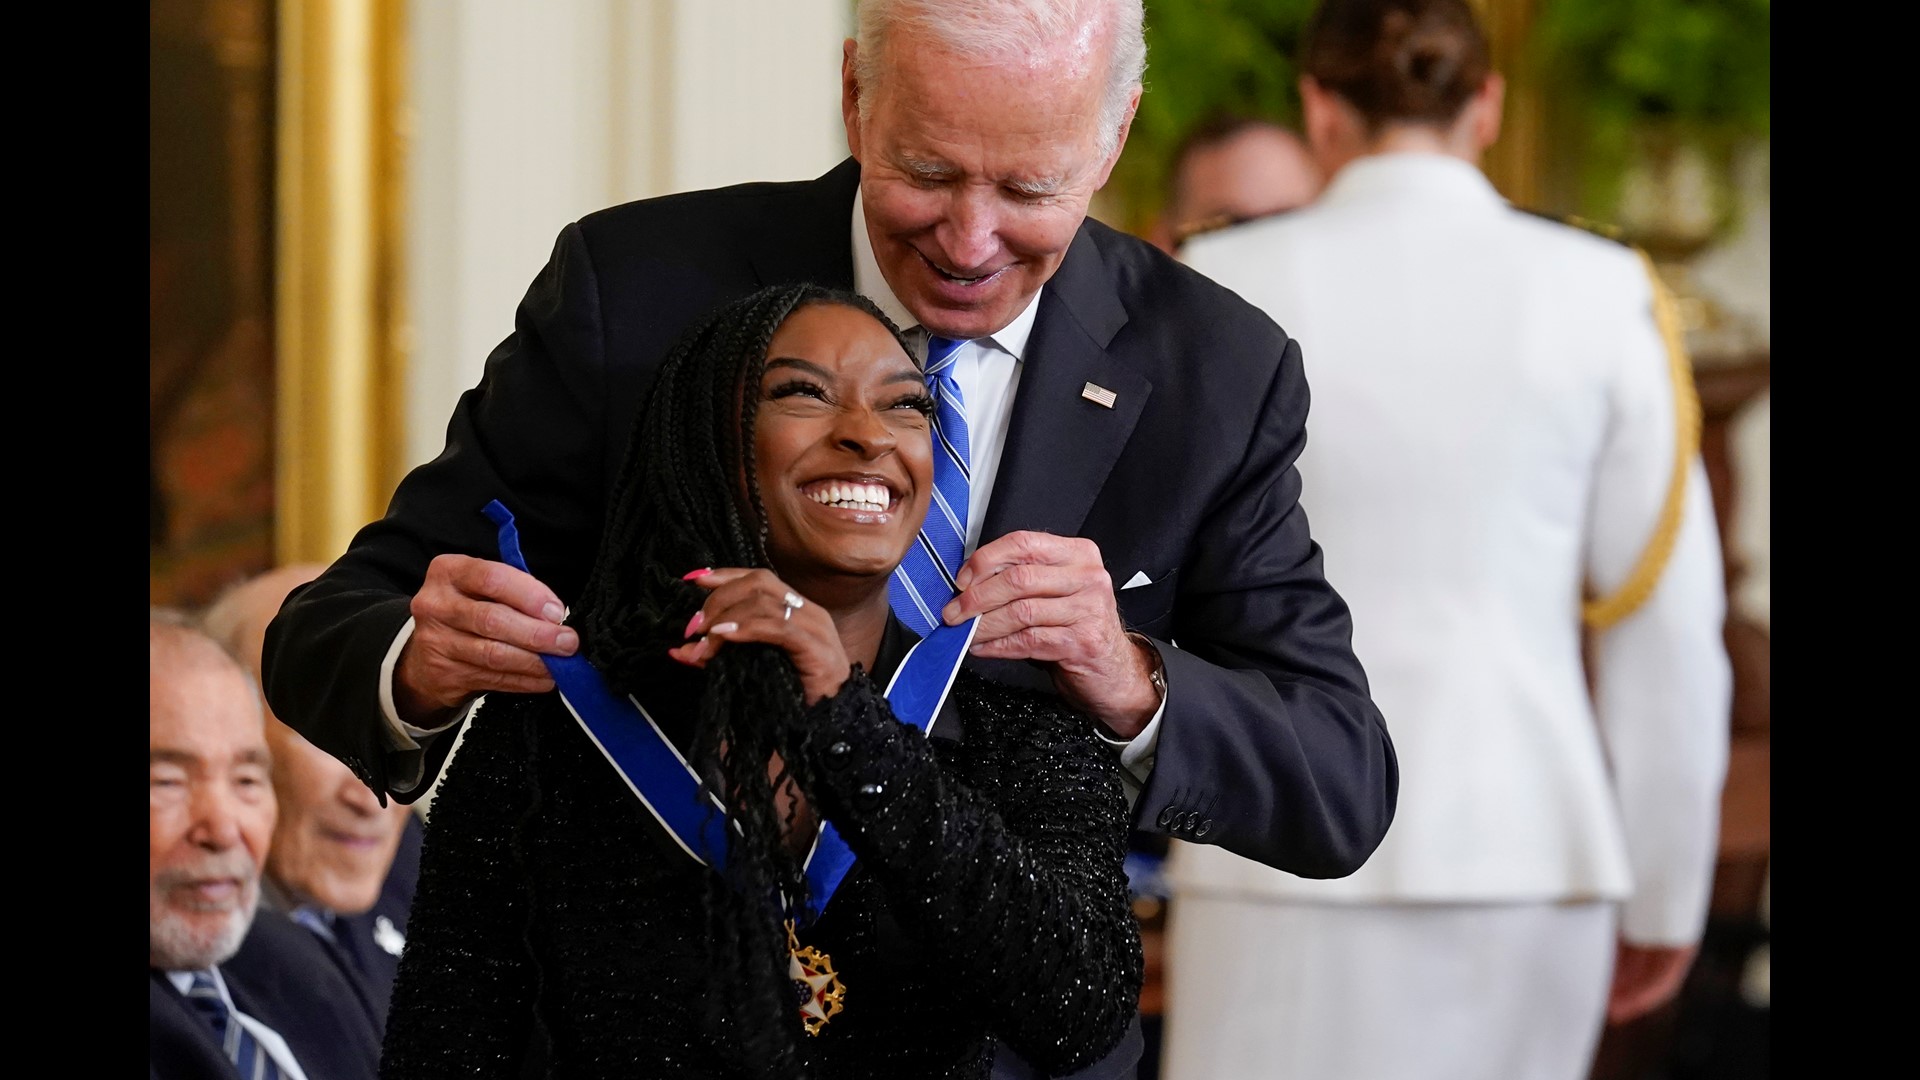 President Biden awards the Medal of Freedom to 17 people, including Simone Biles, Gabrielle Giffords and Fred Gray.